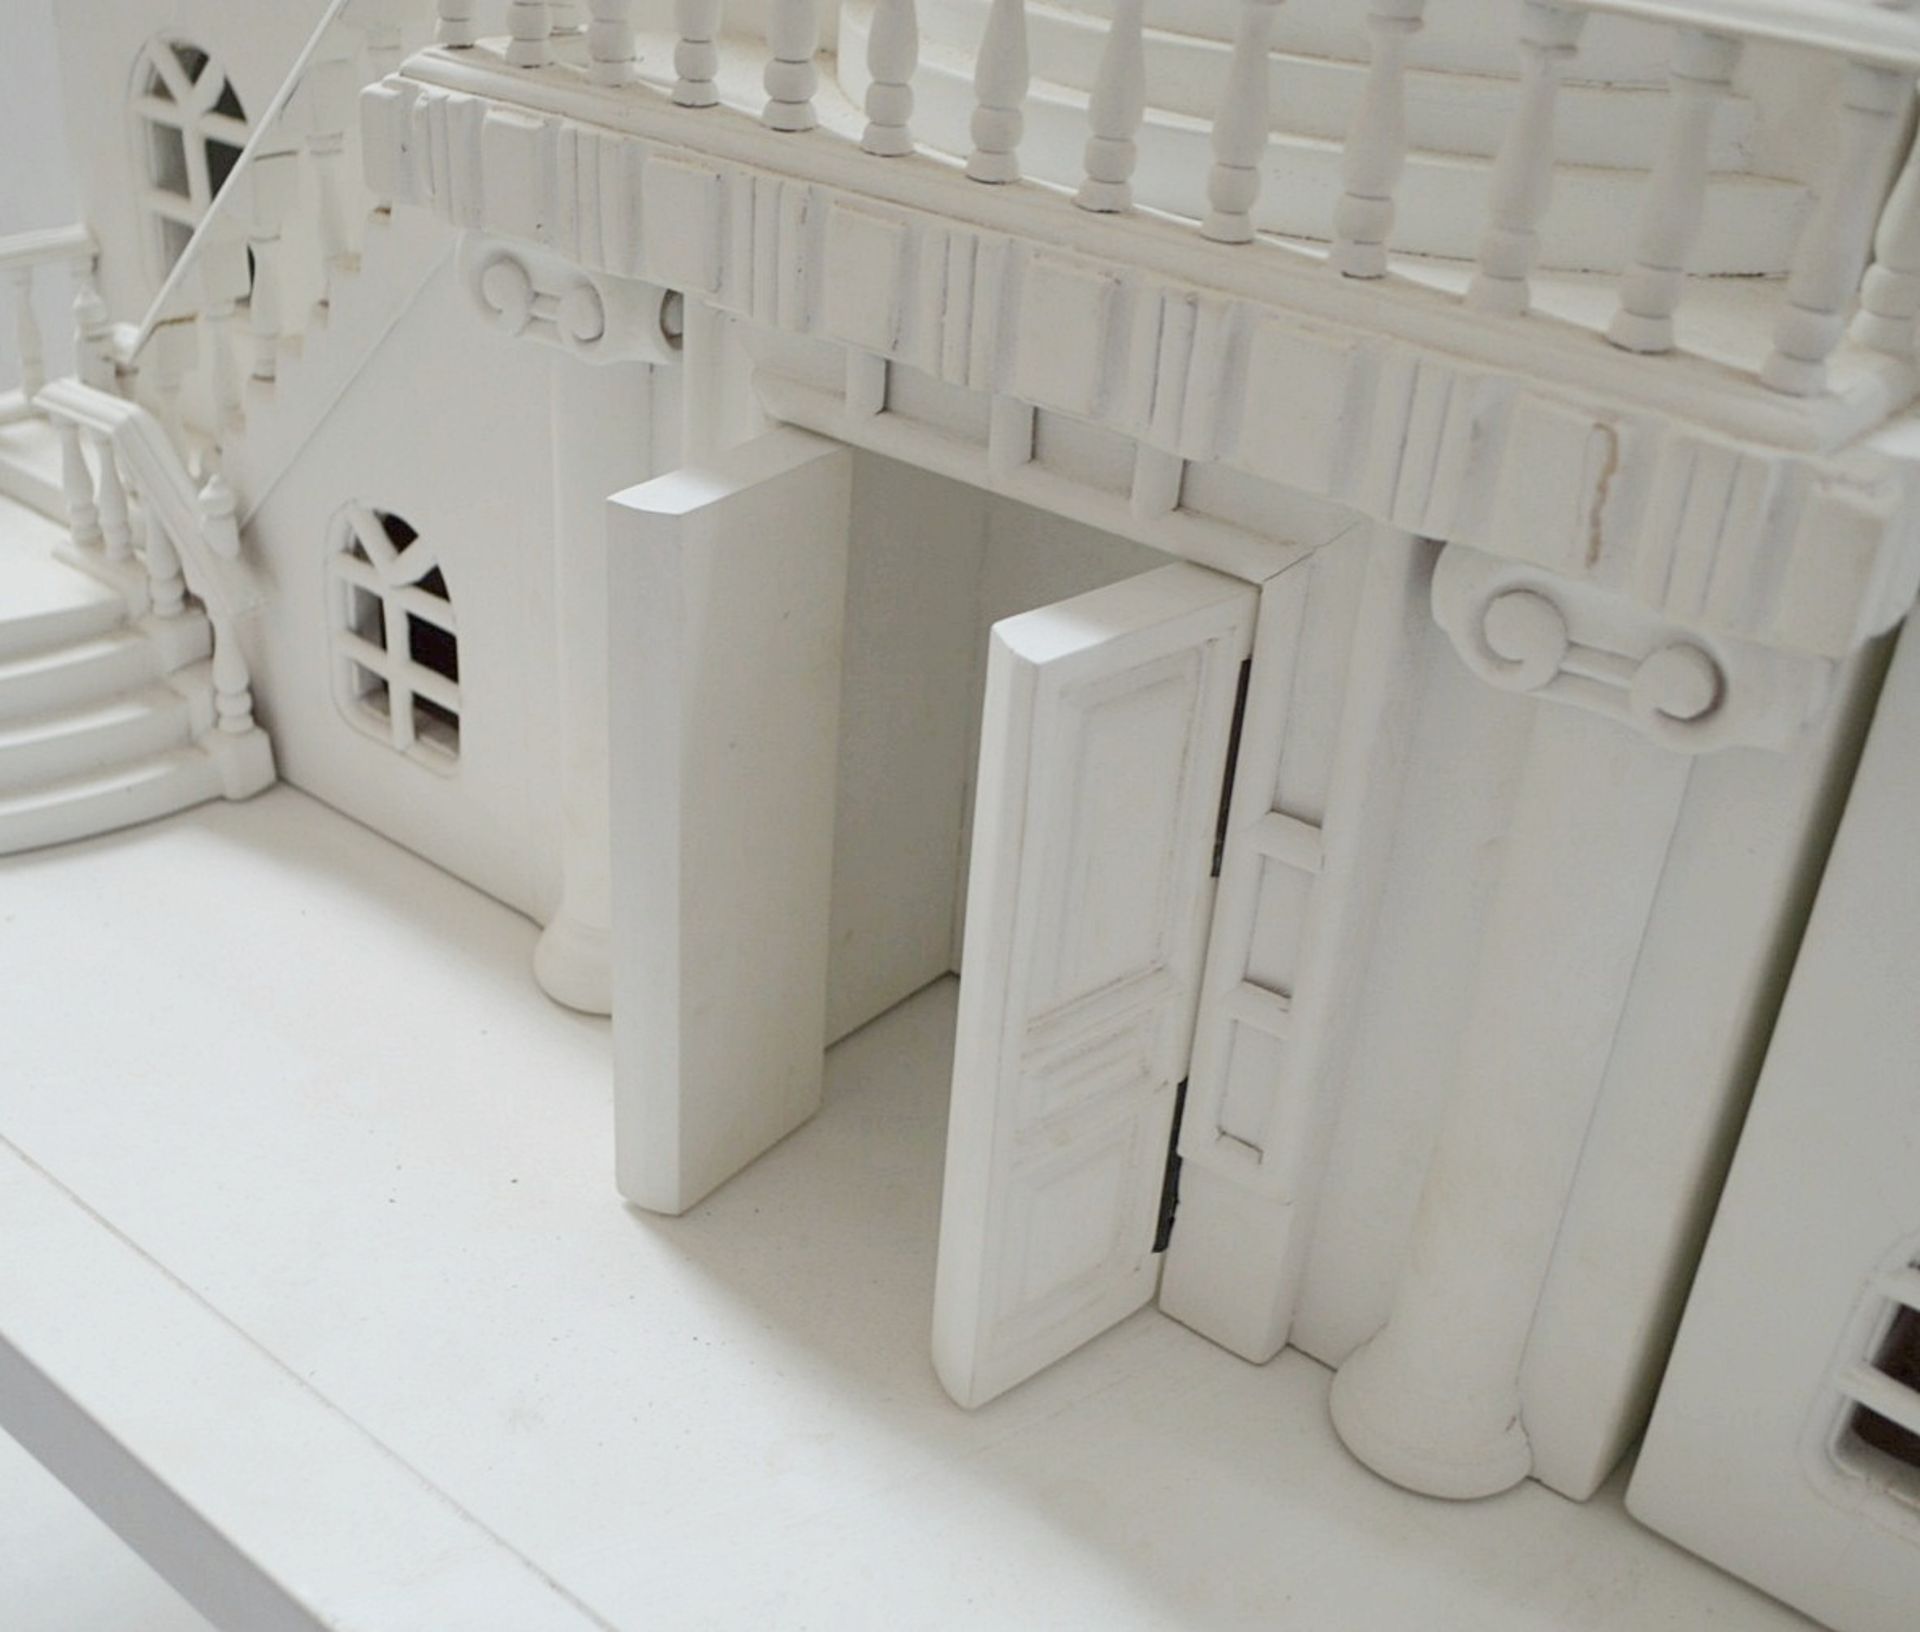 1 x Impressive Bespoke Hand Crafted Wooden Dolls House In White - Image 16 of 19